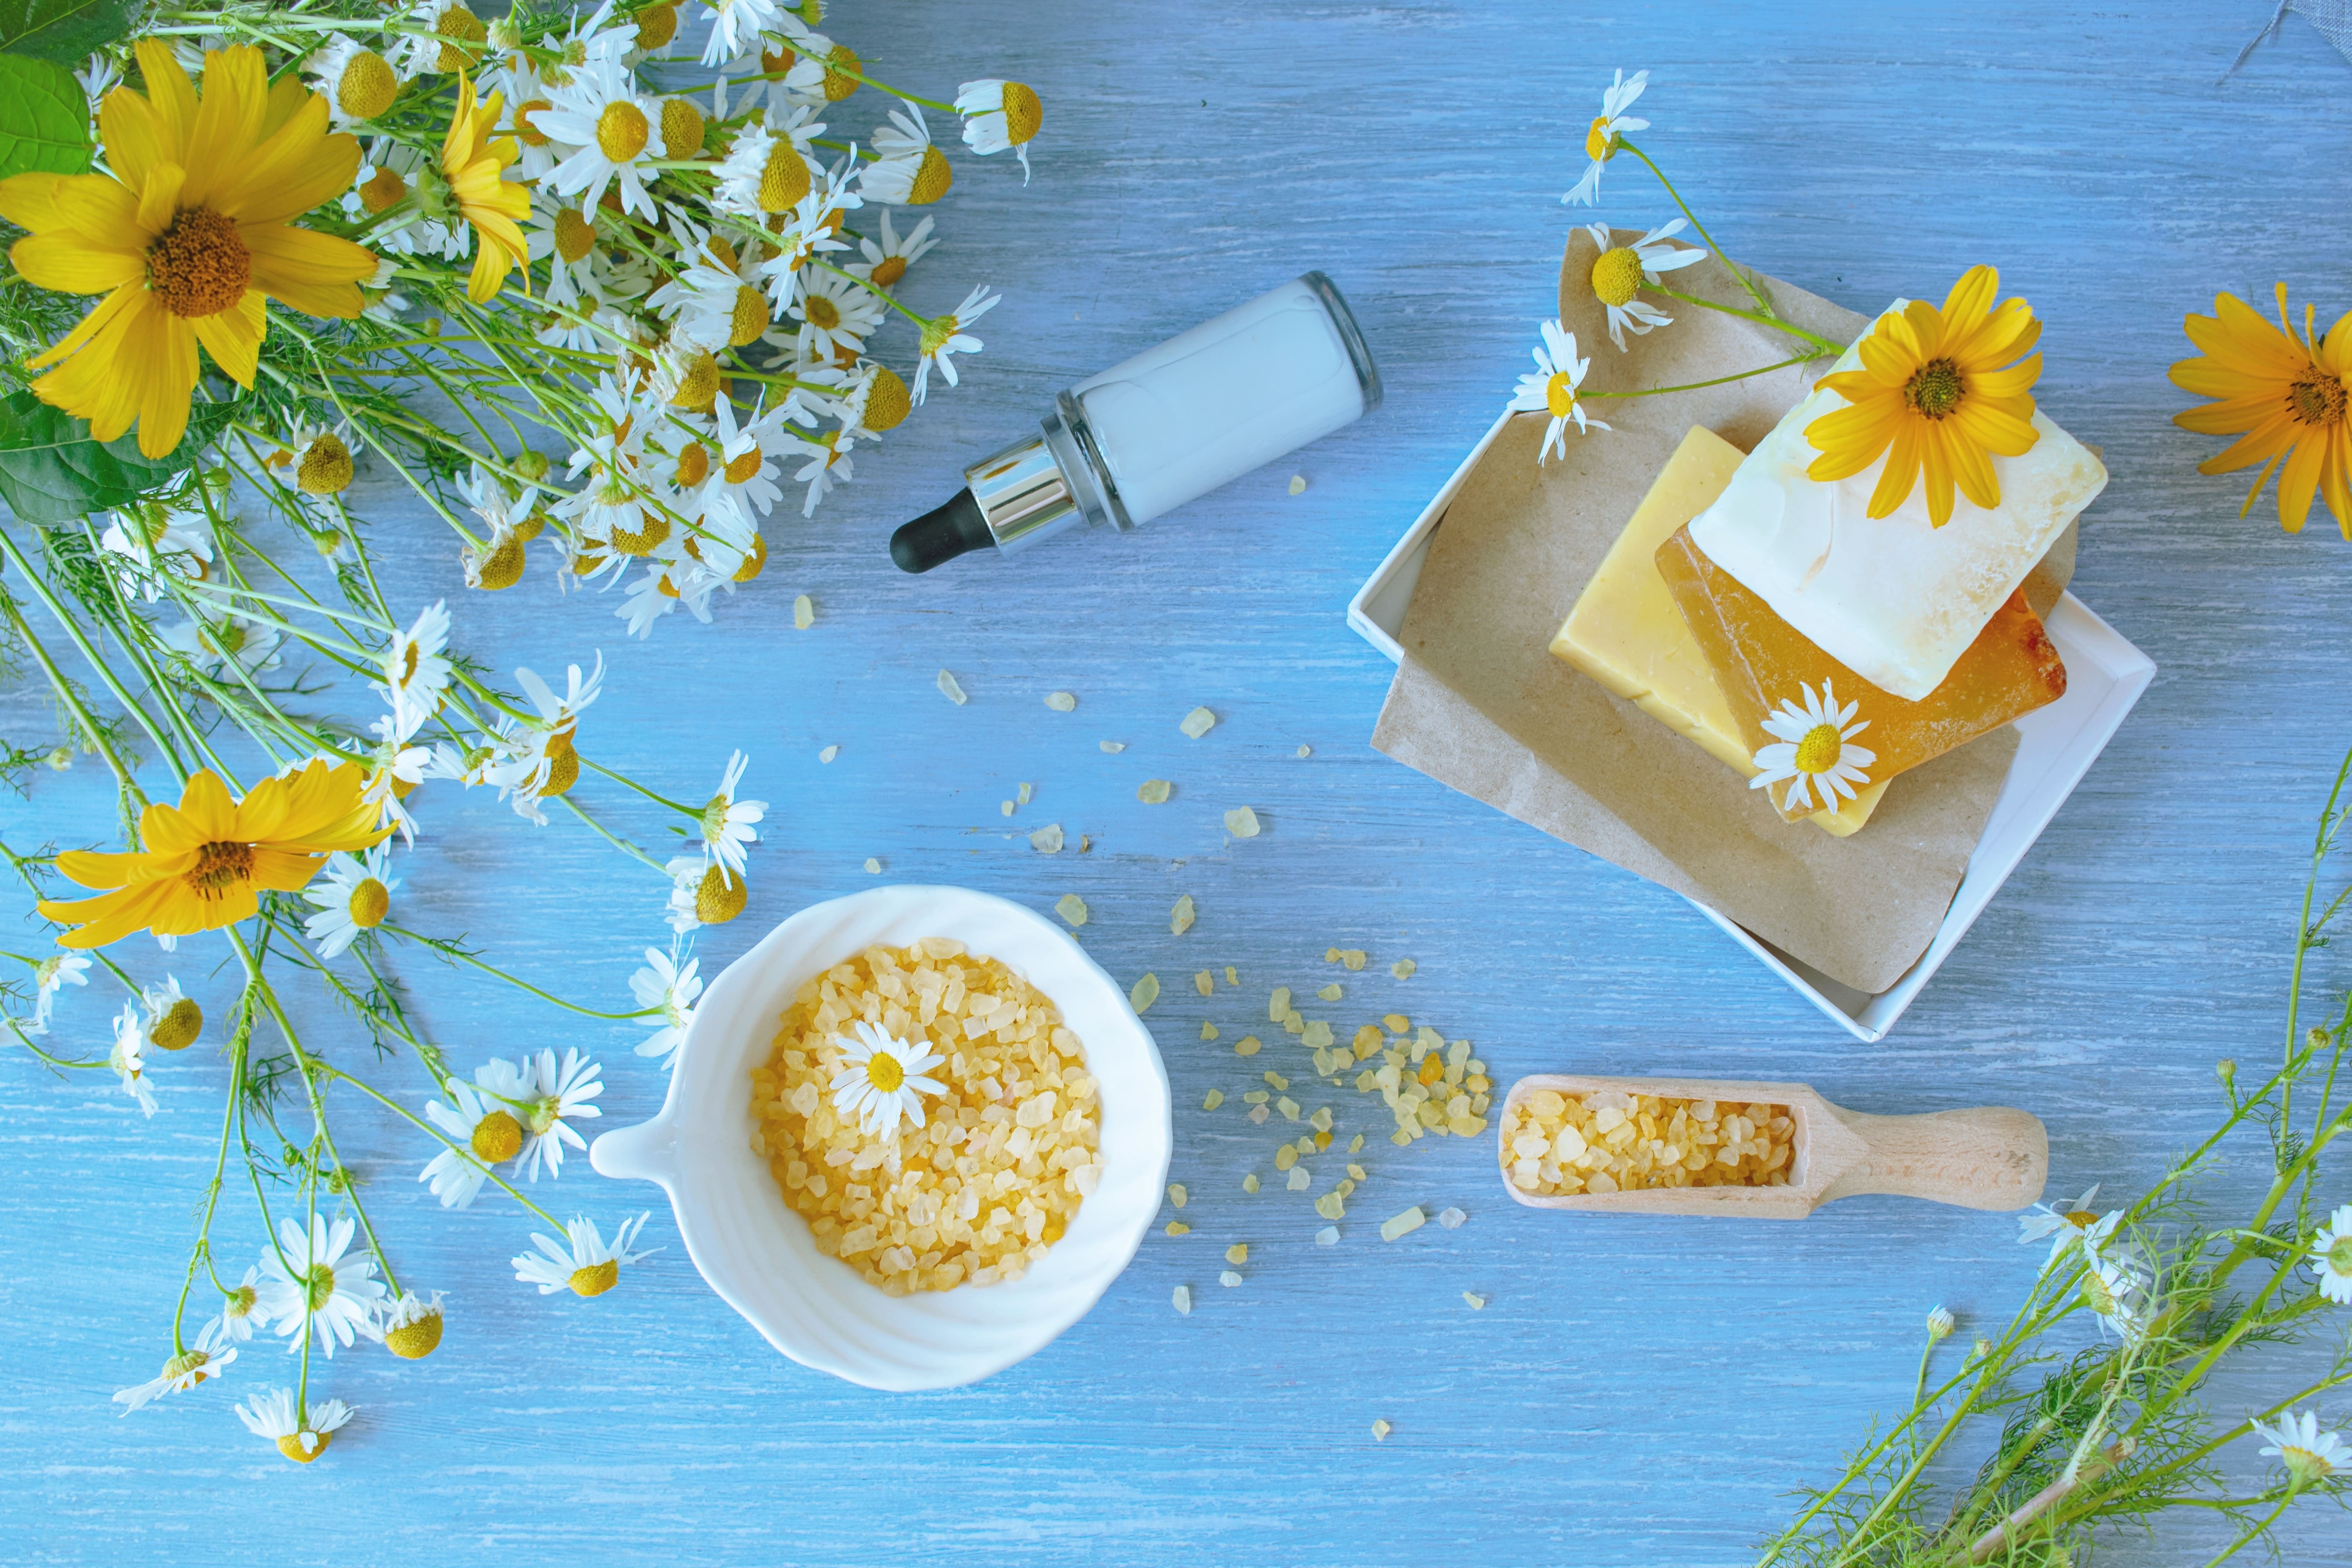 A display of chamomile flowers, soaps and crystals set against a backdrop of blue-washed wood